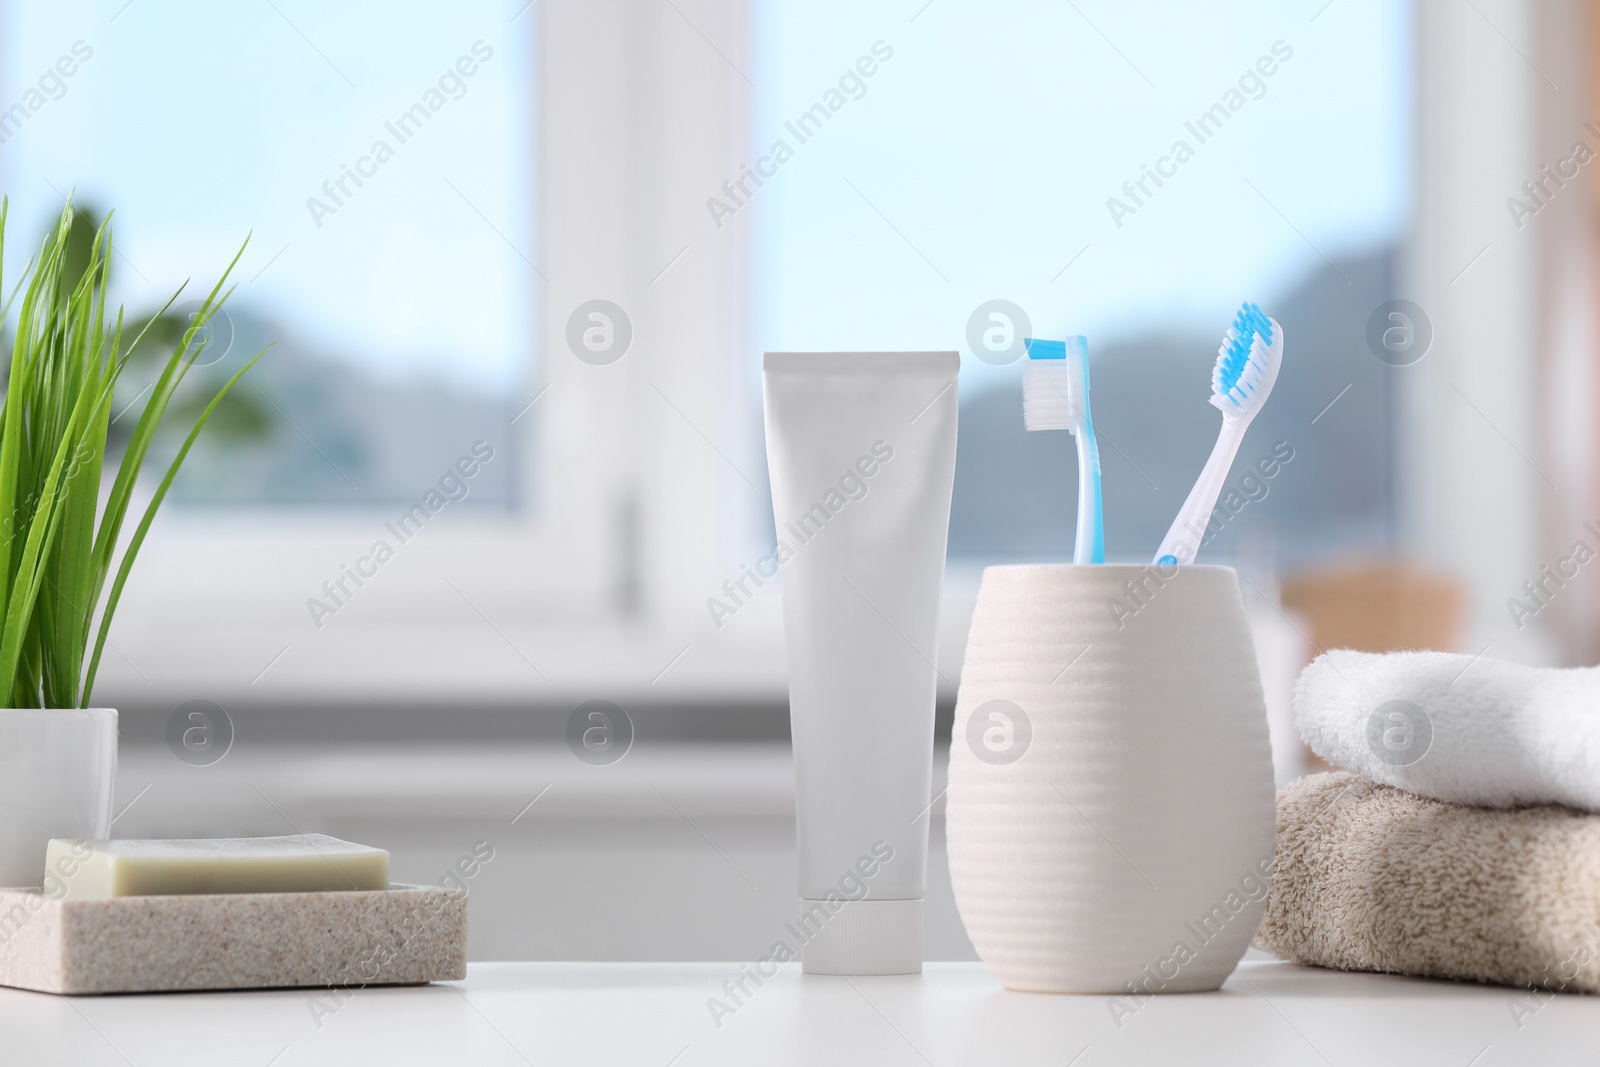 Photo of Plastic toothbrushes in holder, toothpaste, soap bar and towels on white table indoors